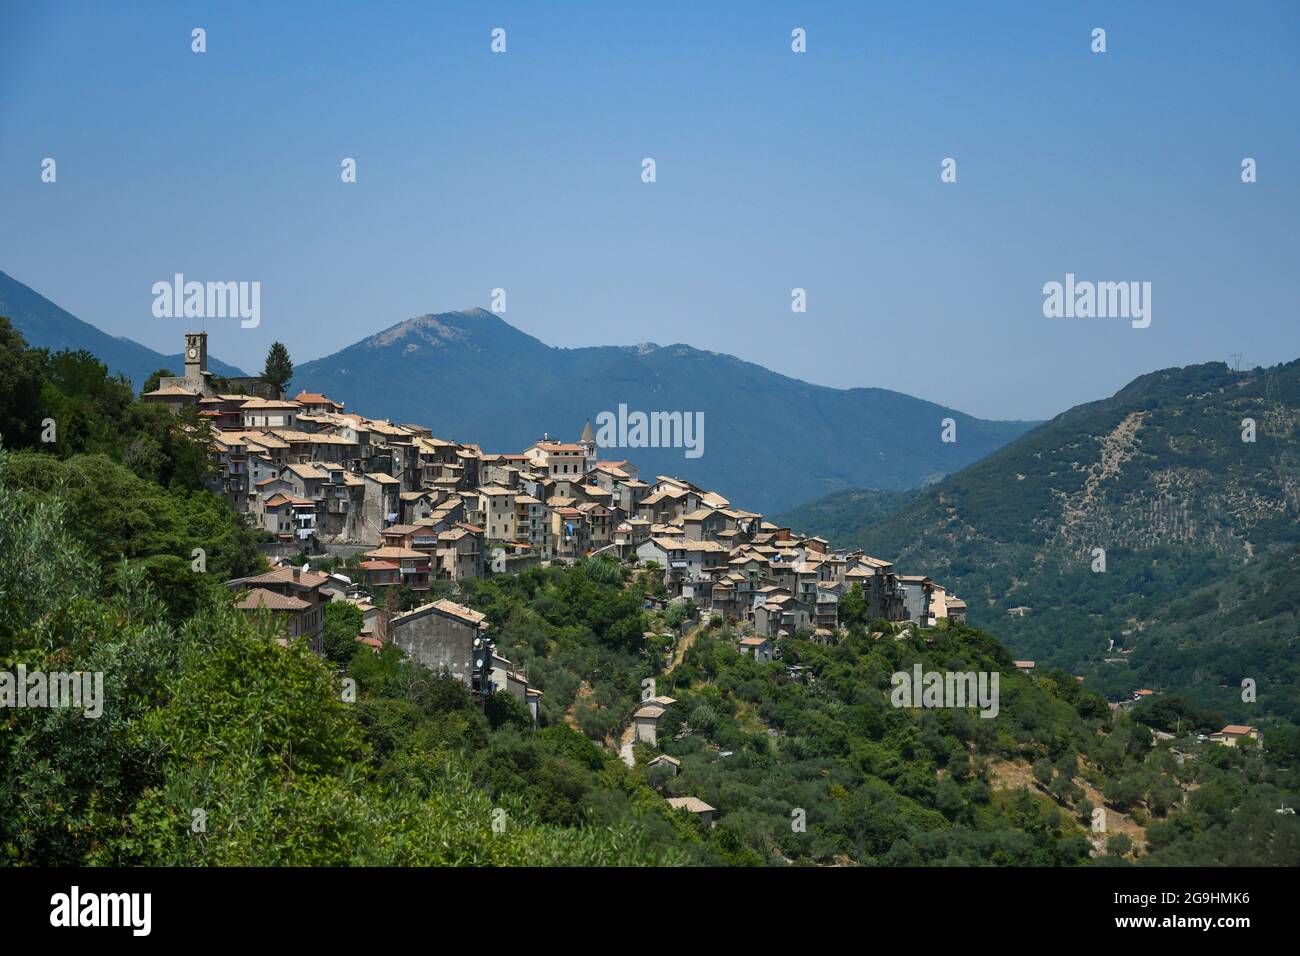 Panoramic view of Carpineto Romano, a medieval town in the mountains of the Lazio region, Italy. Stock Photo